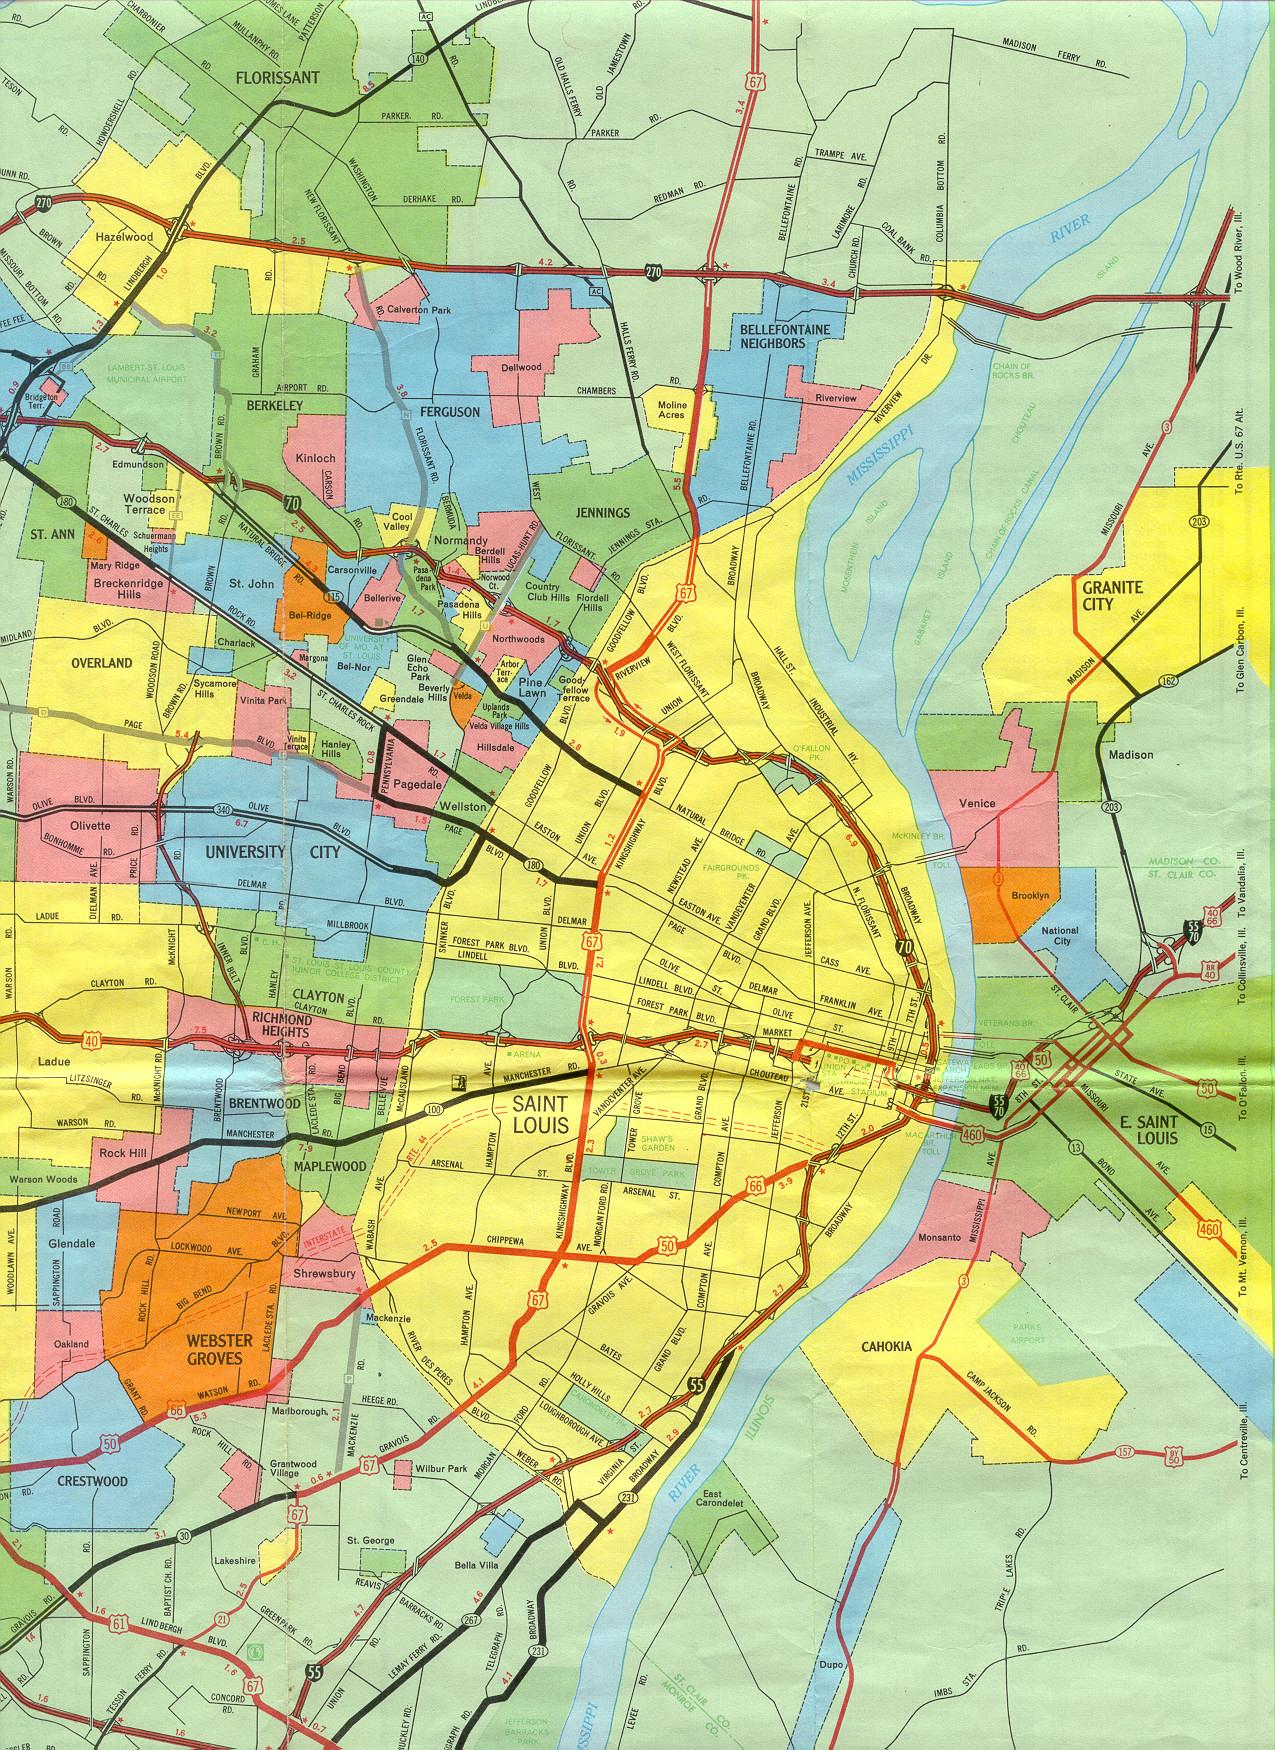 Inset map for St. Louis, Mo. (1969)